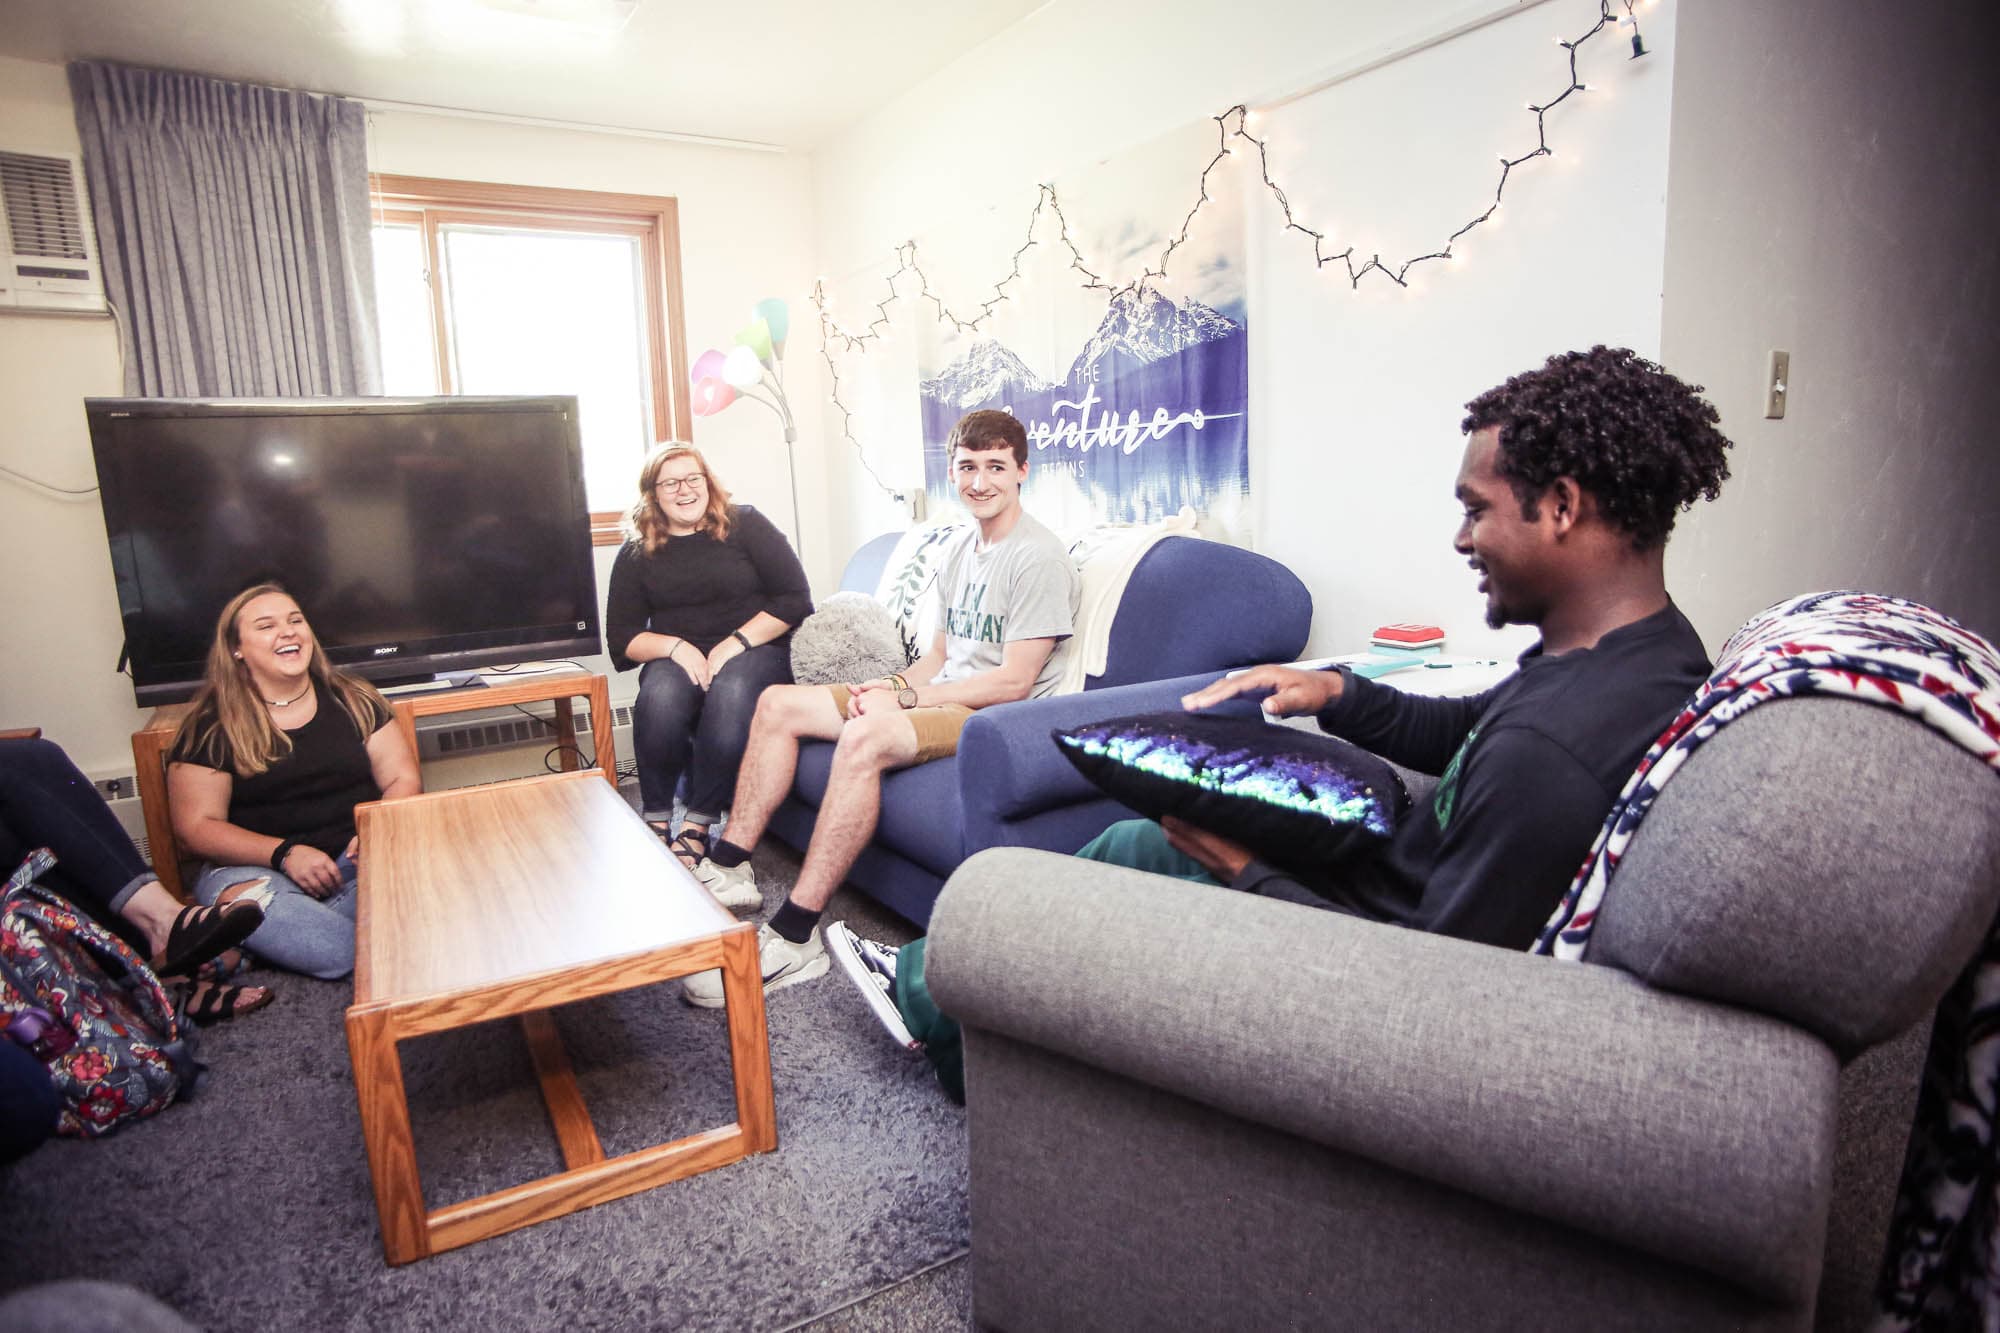 Students hanging out in a residence hall suite